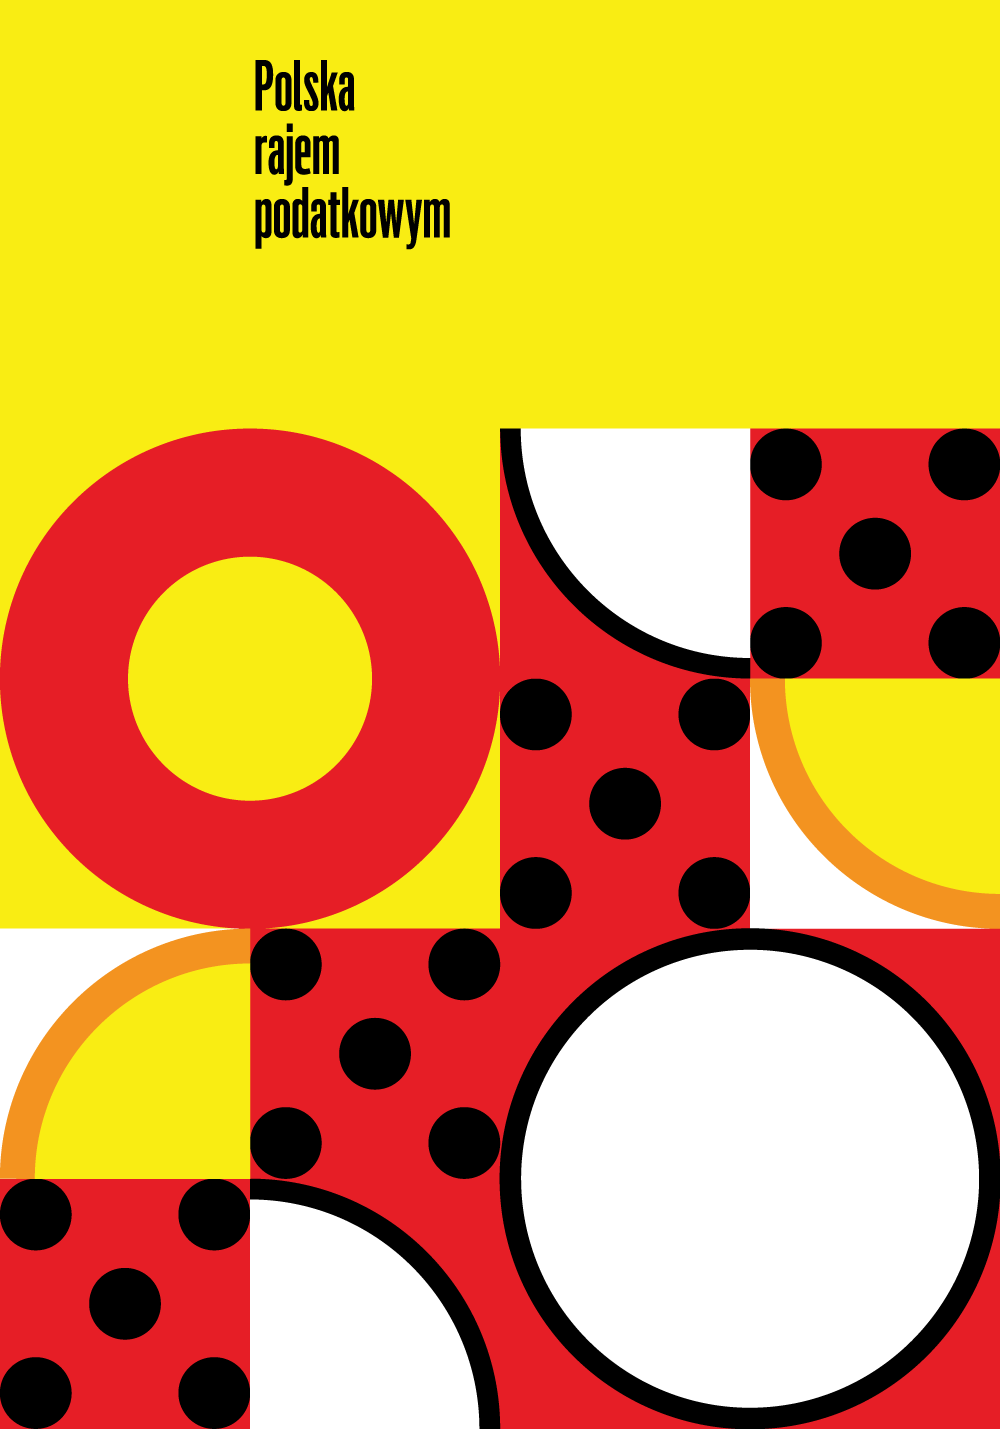 A poster showing geometric shapes in the brand colours of Biedronka - popular food supermarket in Poland.